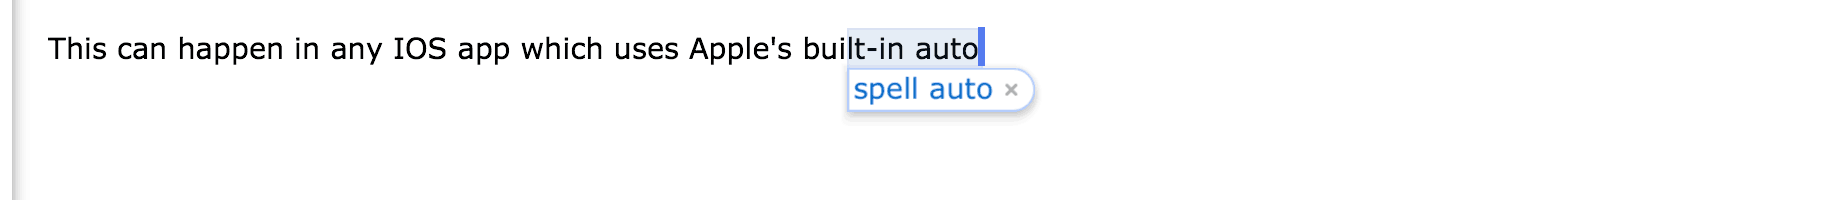 How To Reset Your Iphone Spell Check